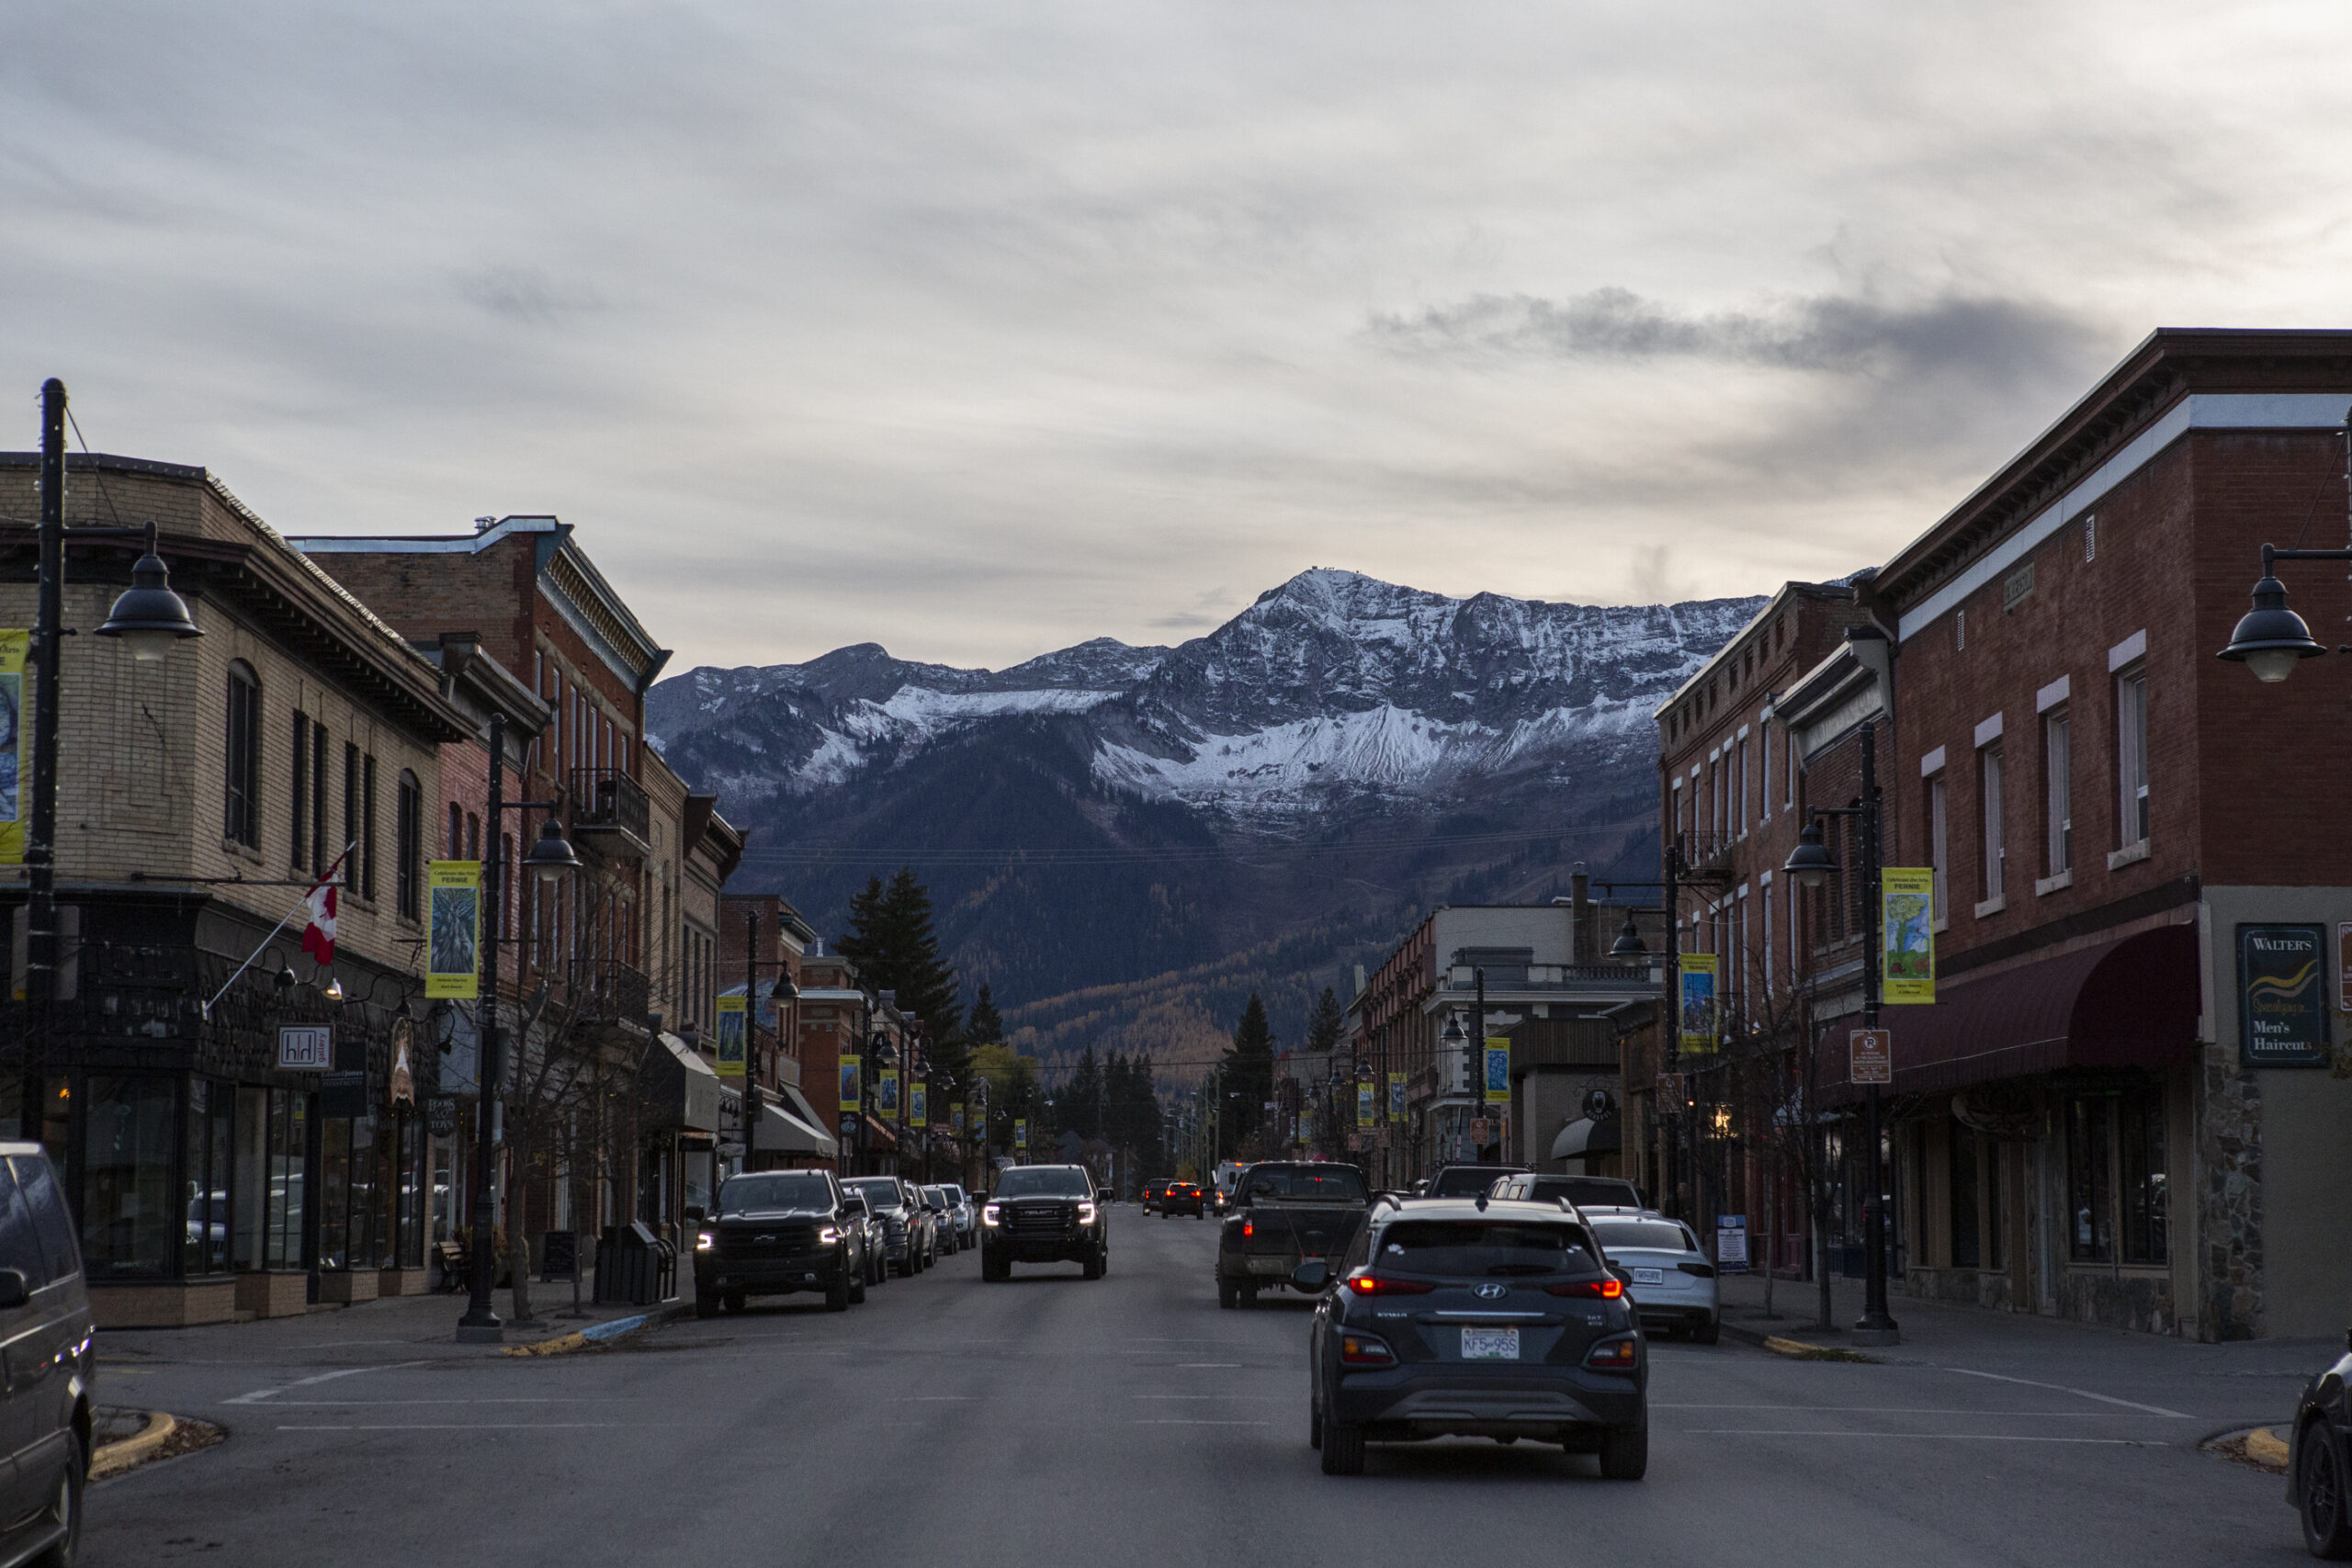 Street view of Fernie B.C. with snowy mountains in the distance